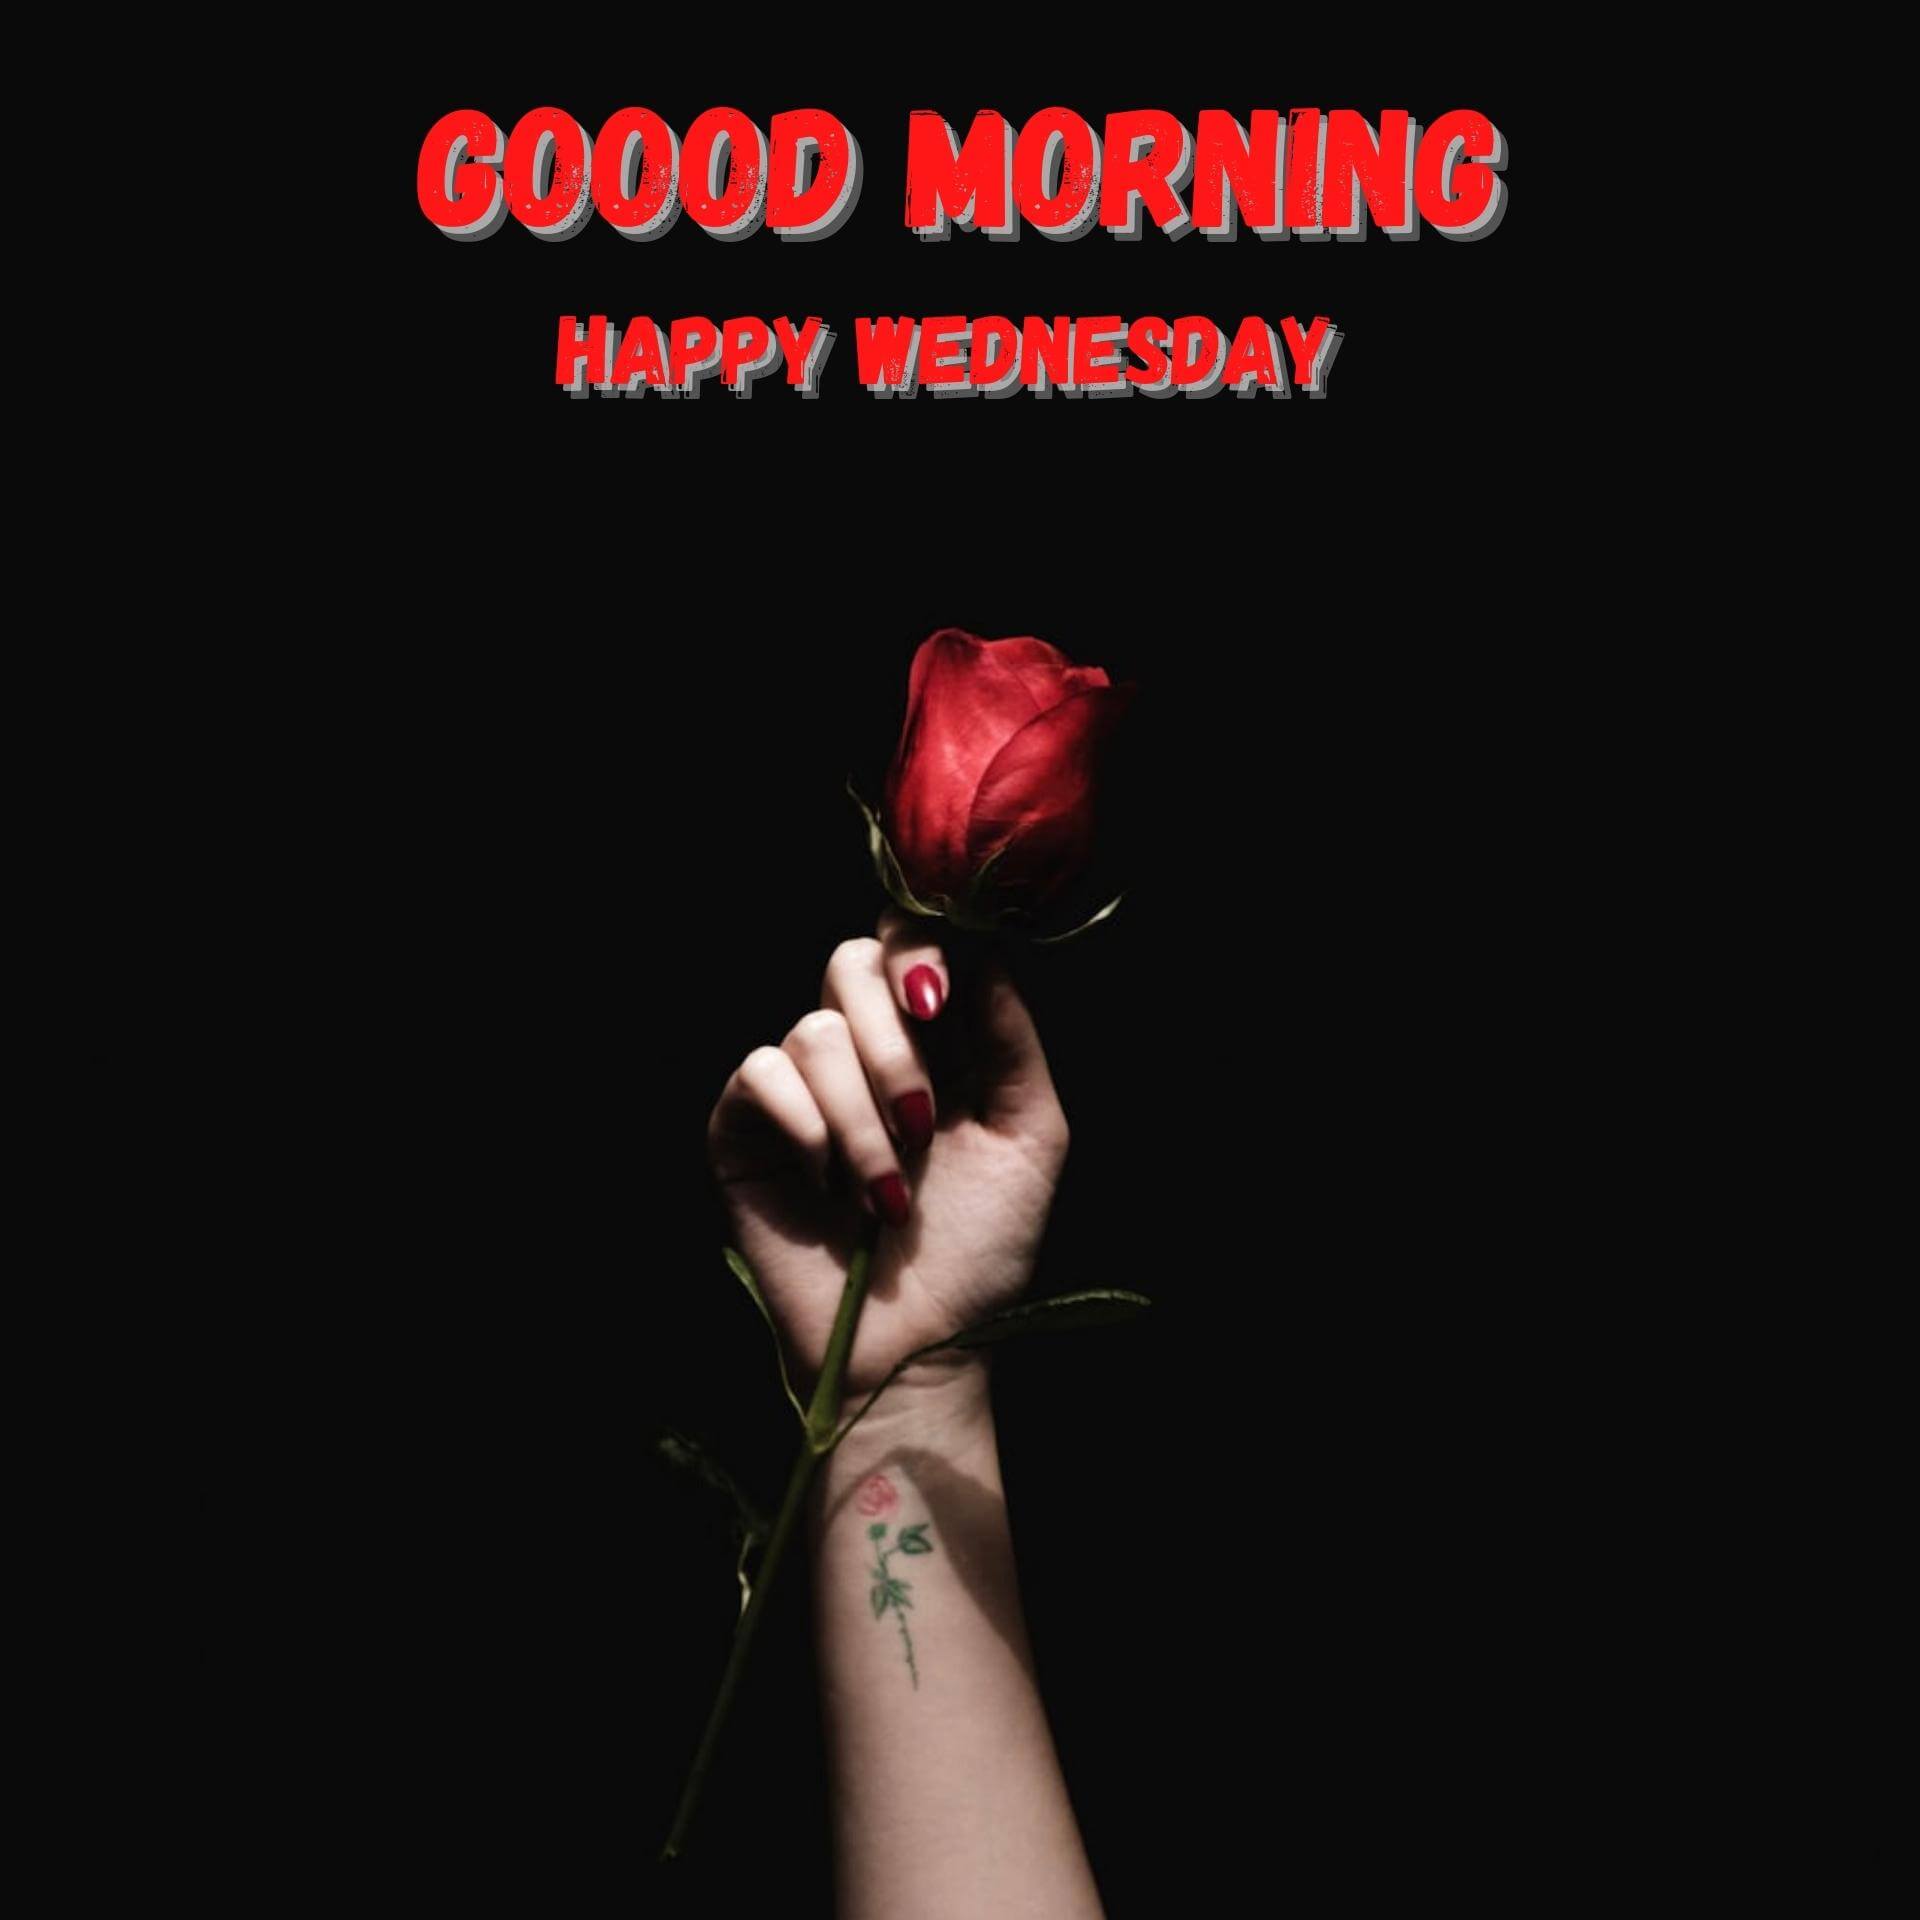 Wednesday good morning photo Download (2)